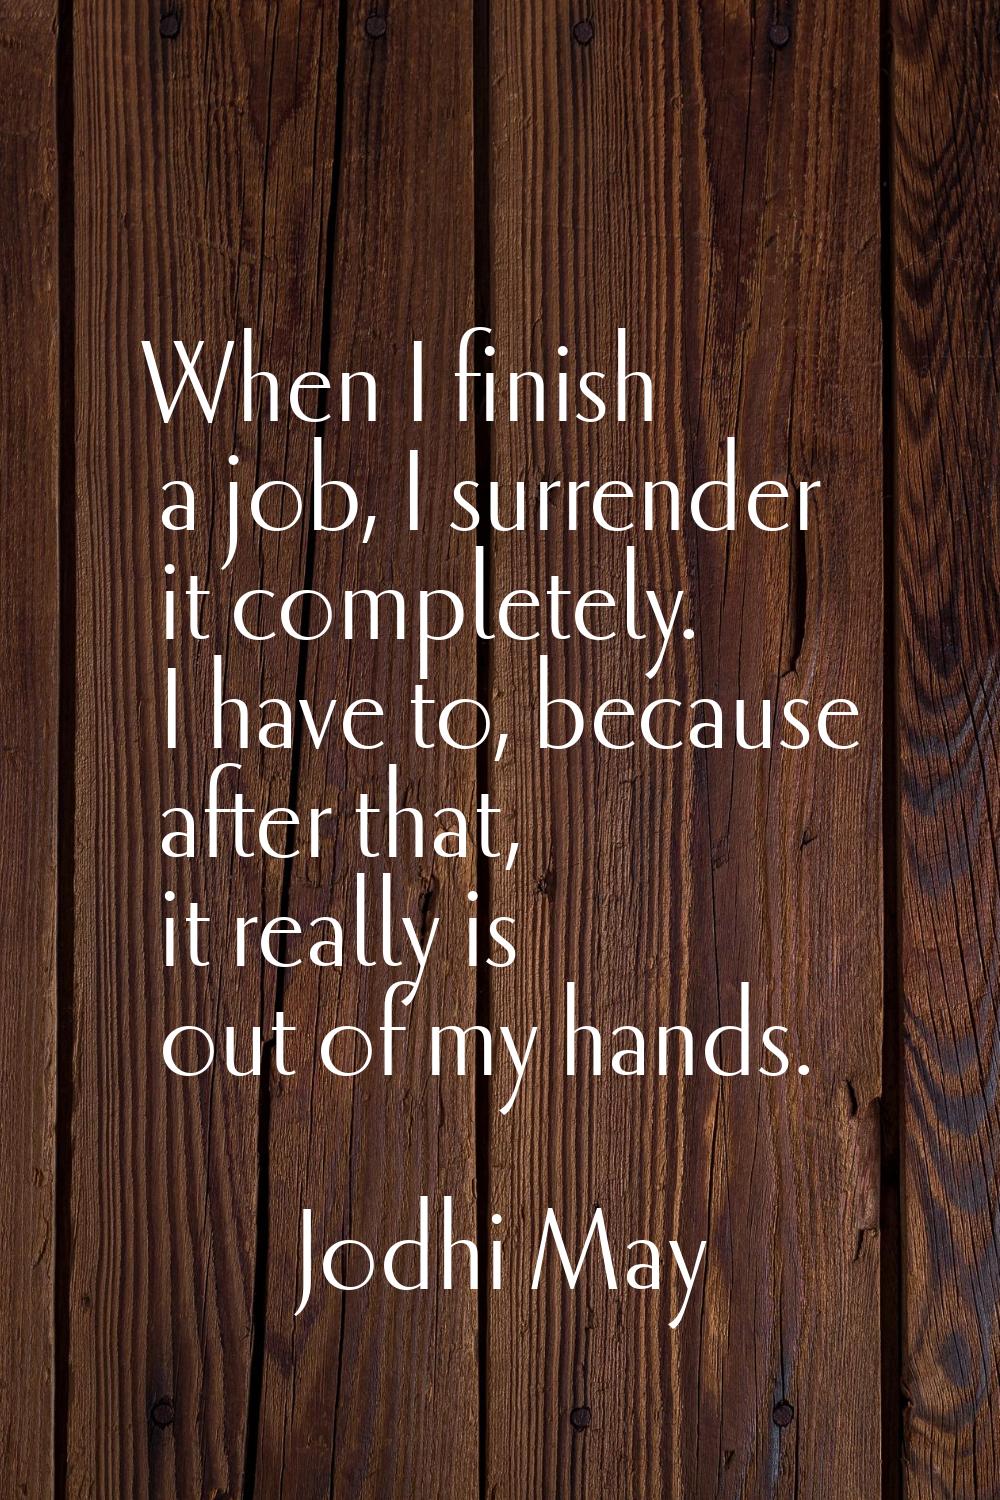 When I finish a job, I surrender it completely. I have to, because after that, it really is out of 